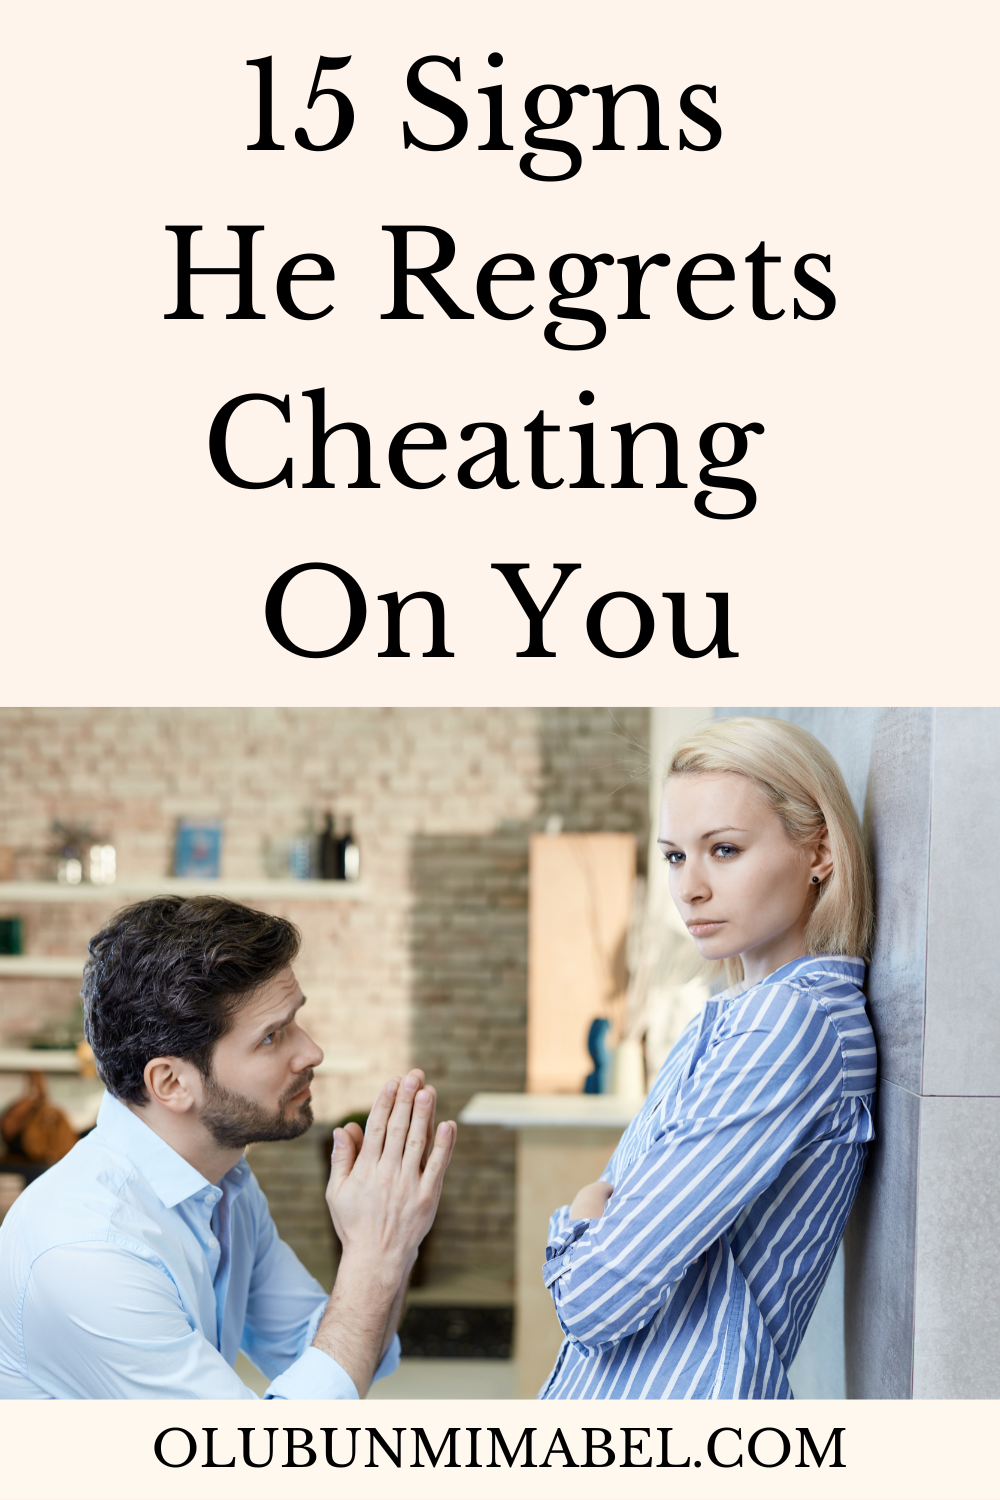 Signs He Regrets Cheating